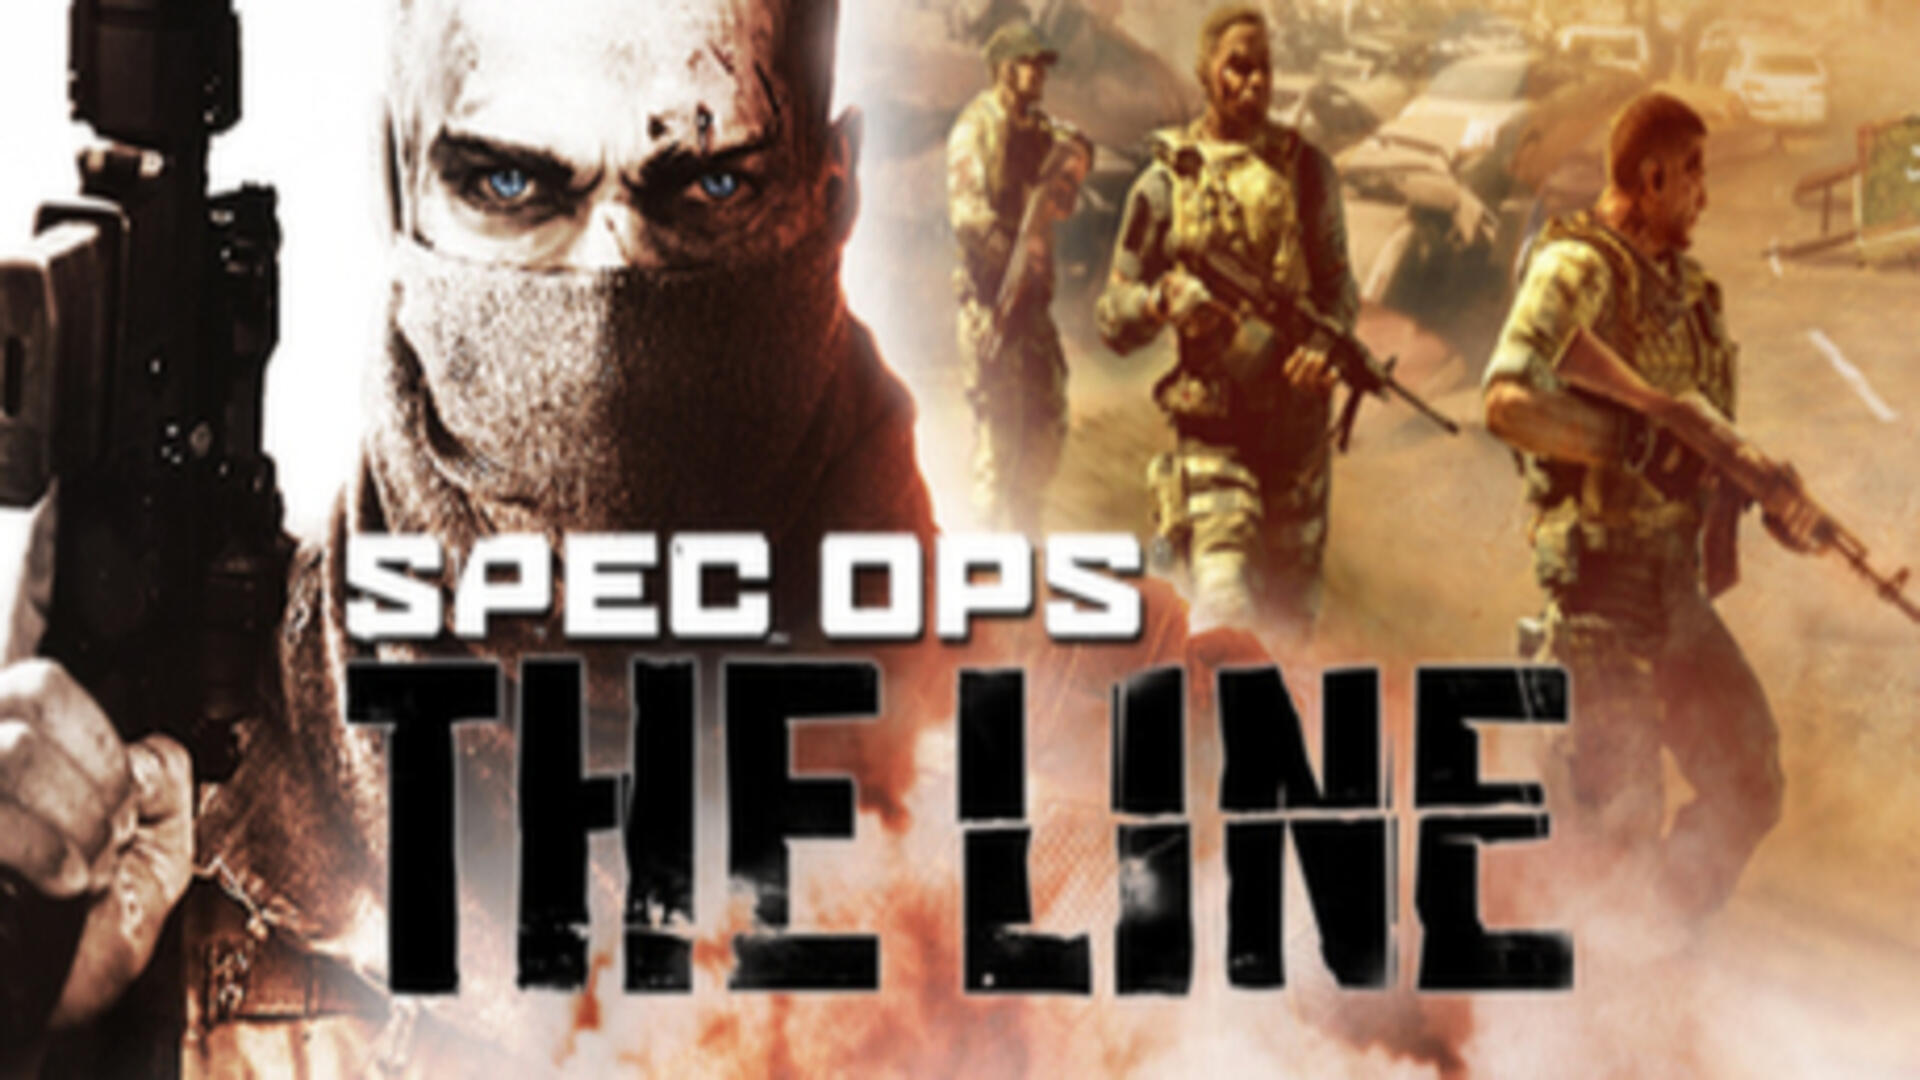 Spec Ops: The Line – Free Download (Build 765818)